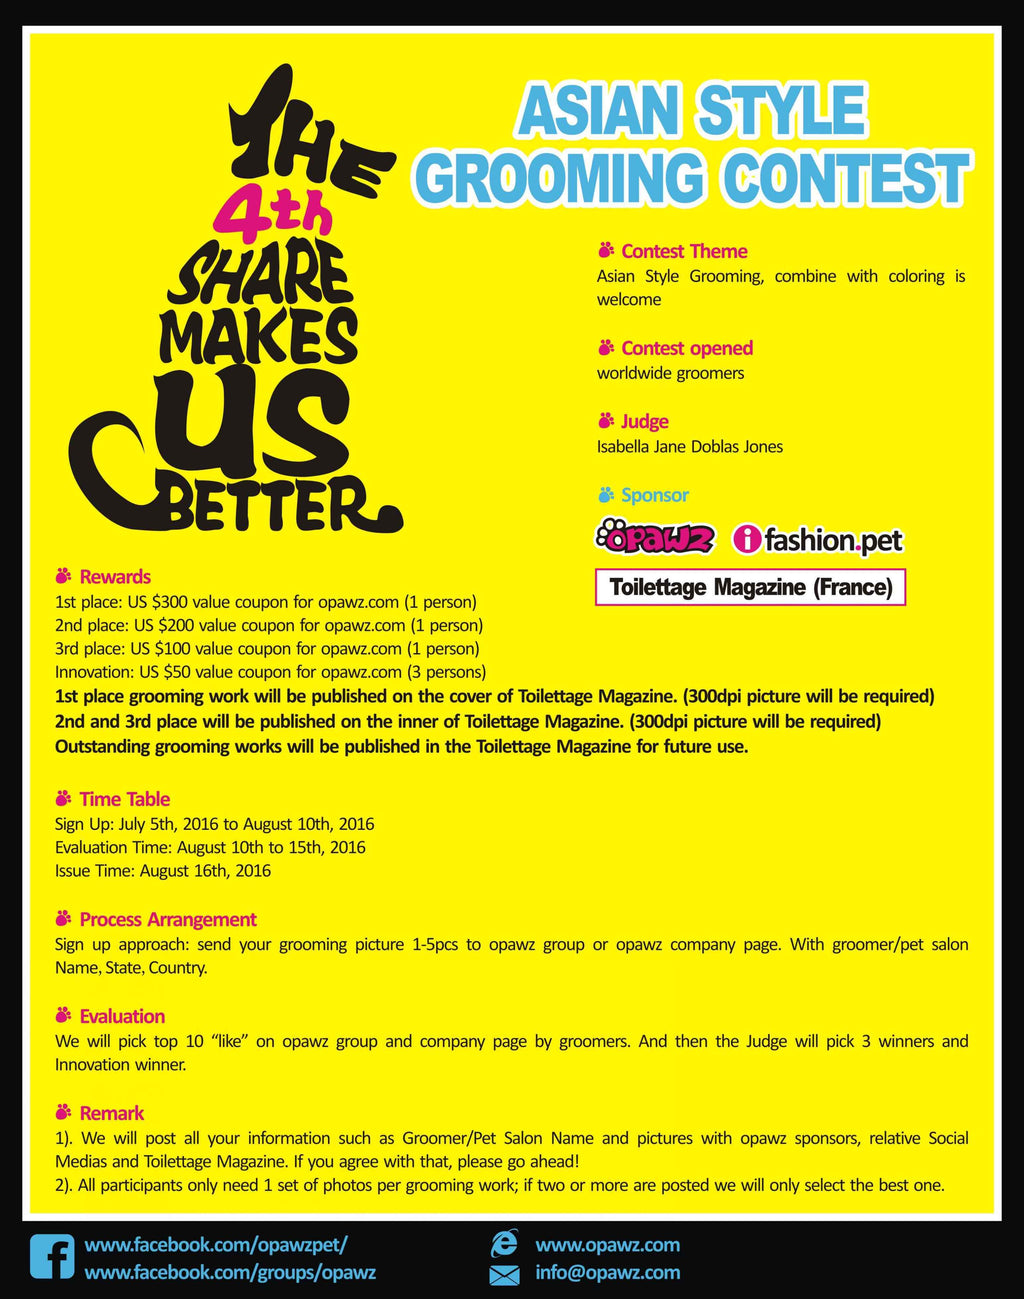 The 4TH Share Makes Us Better Asian Style Grooming Contest